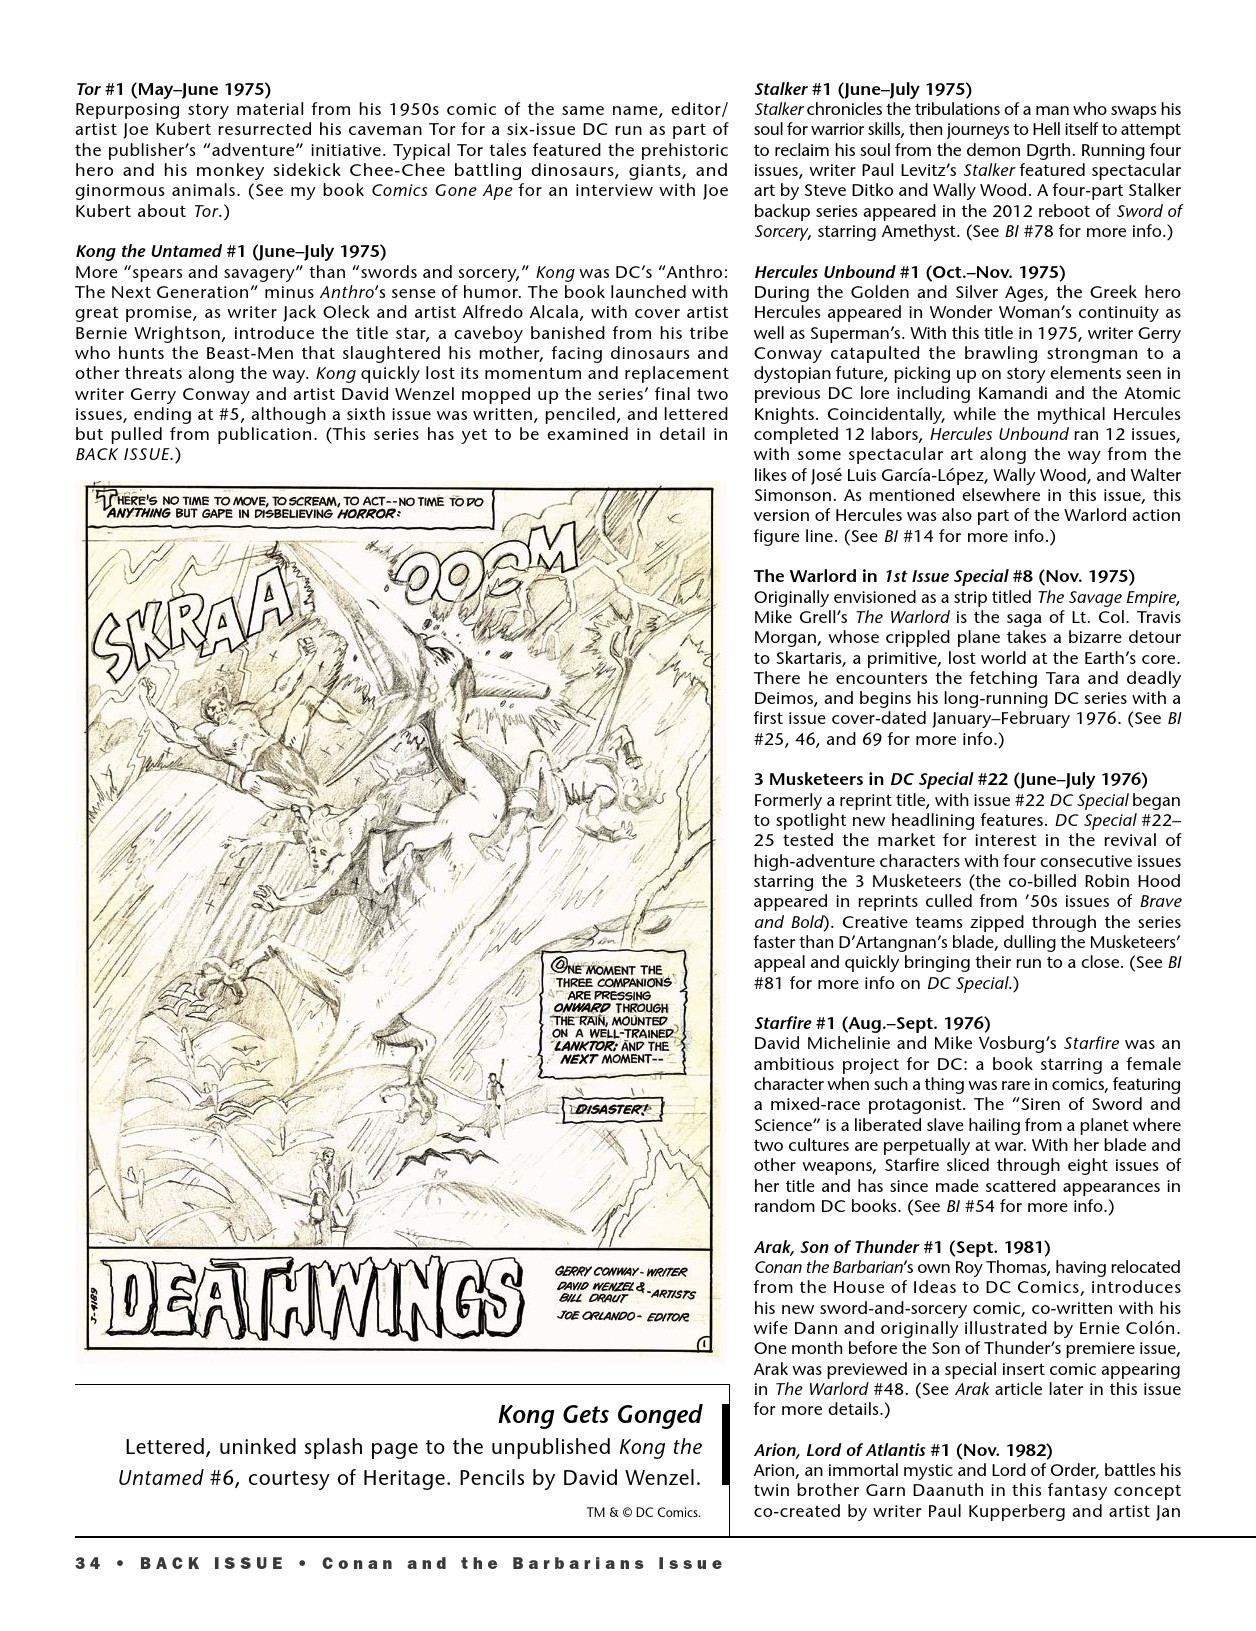 Read online Back Issue comic -  Issue #121 - 36